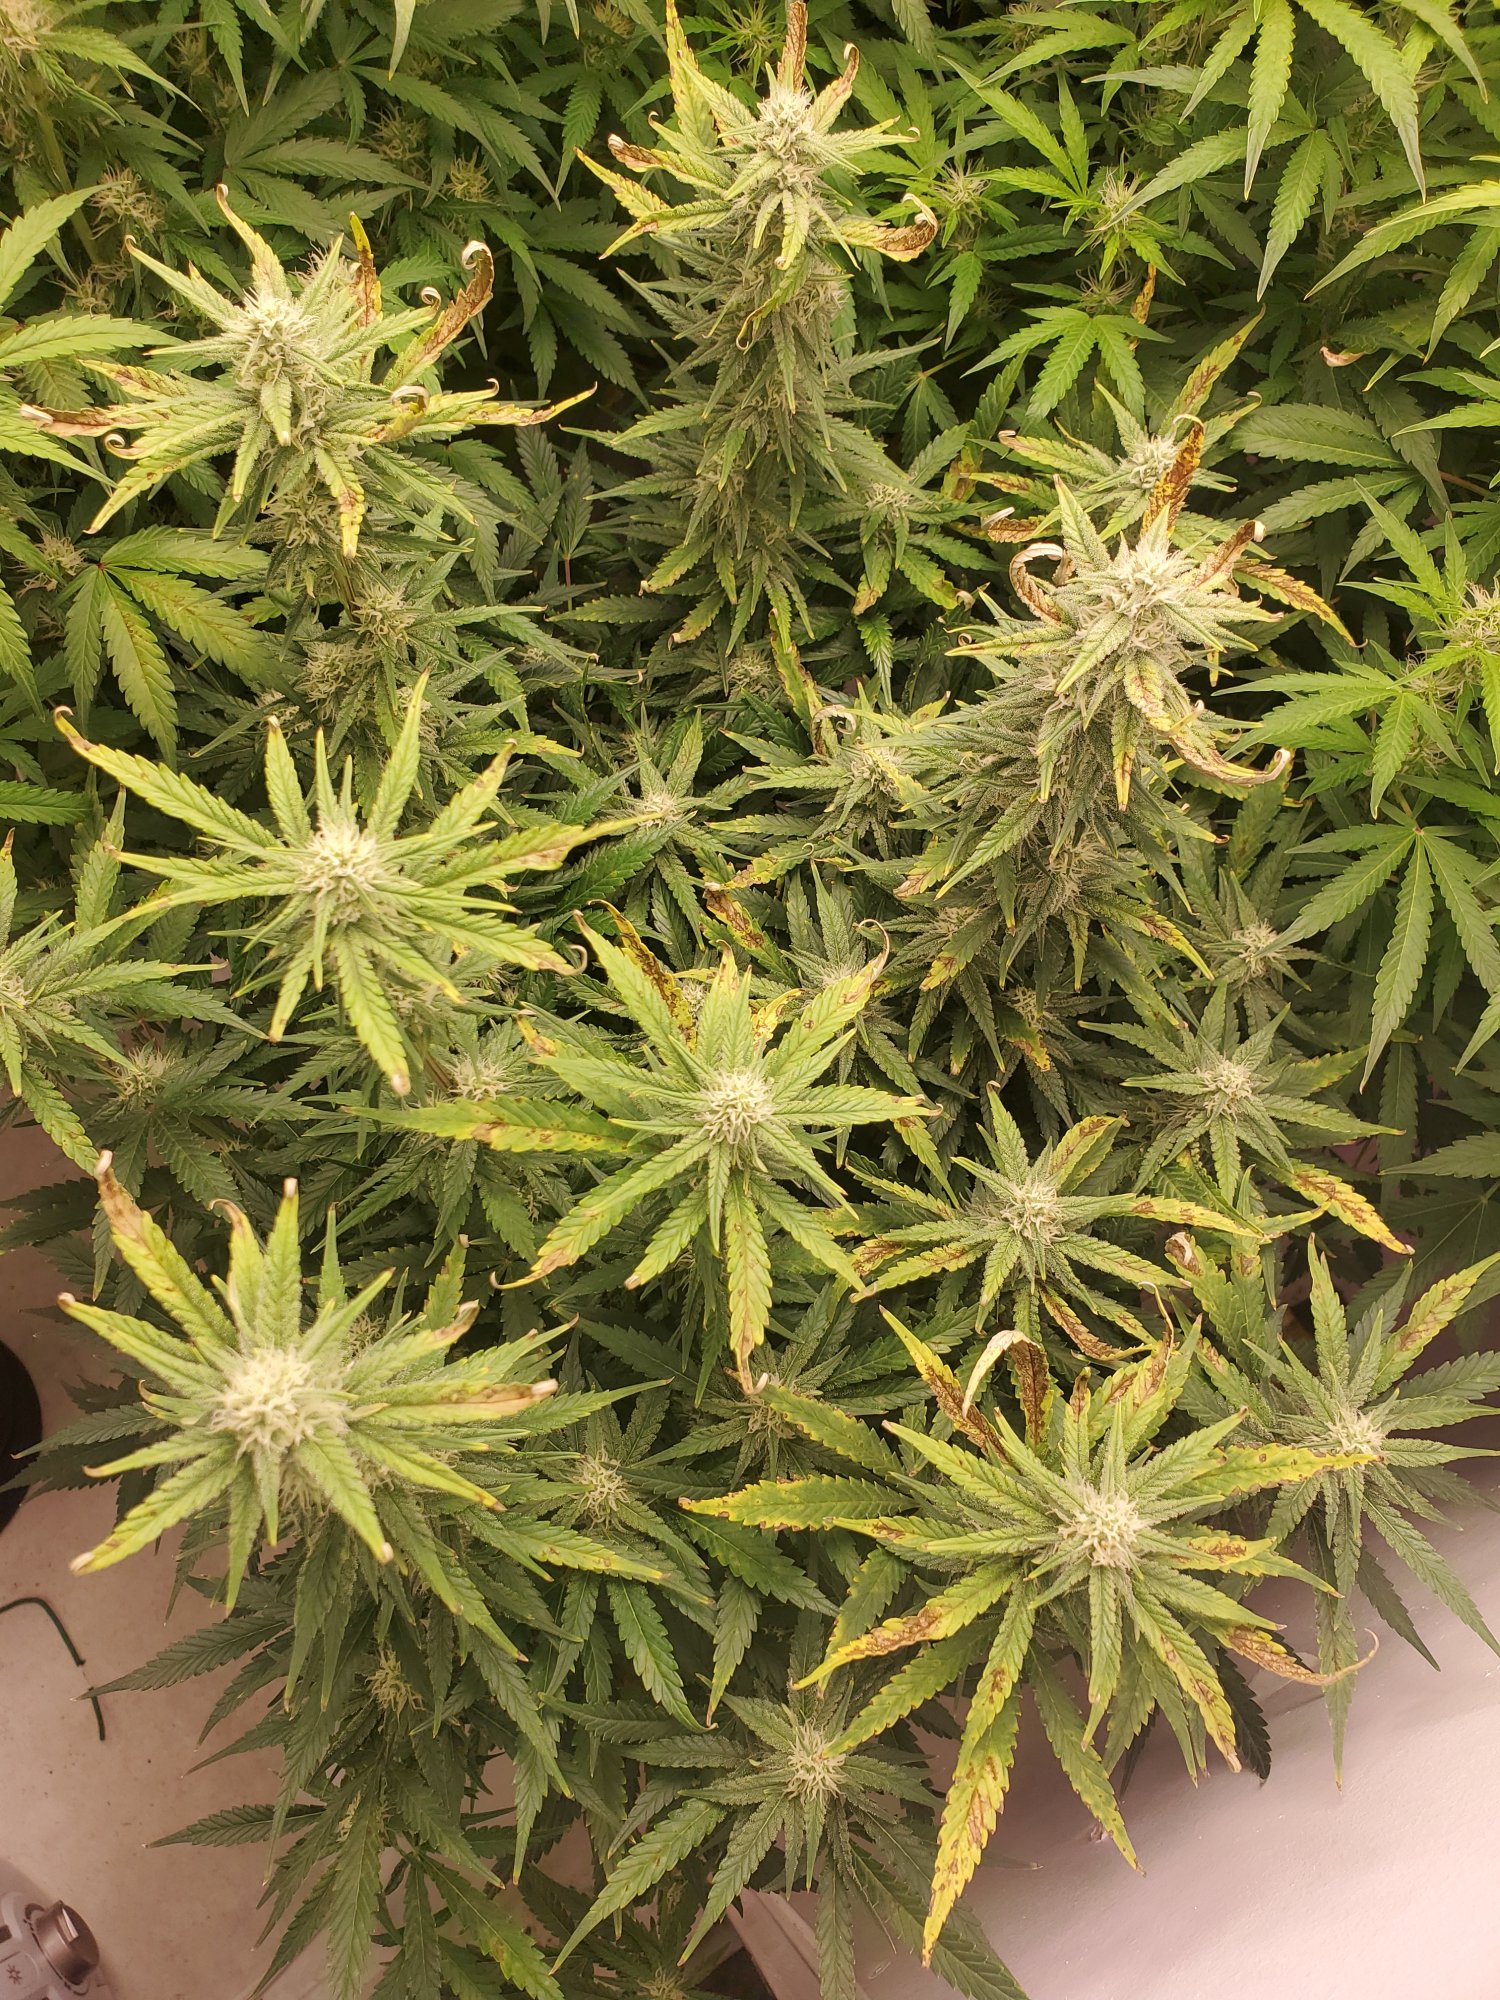 Helphas anyone seen this deficiency maybe 2